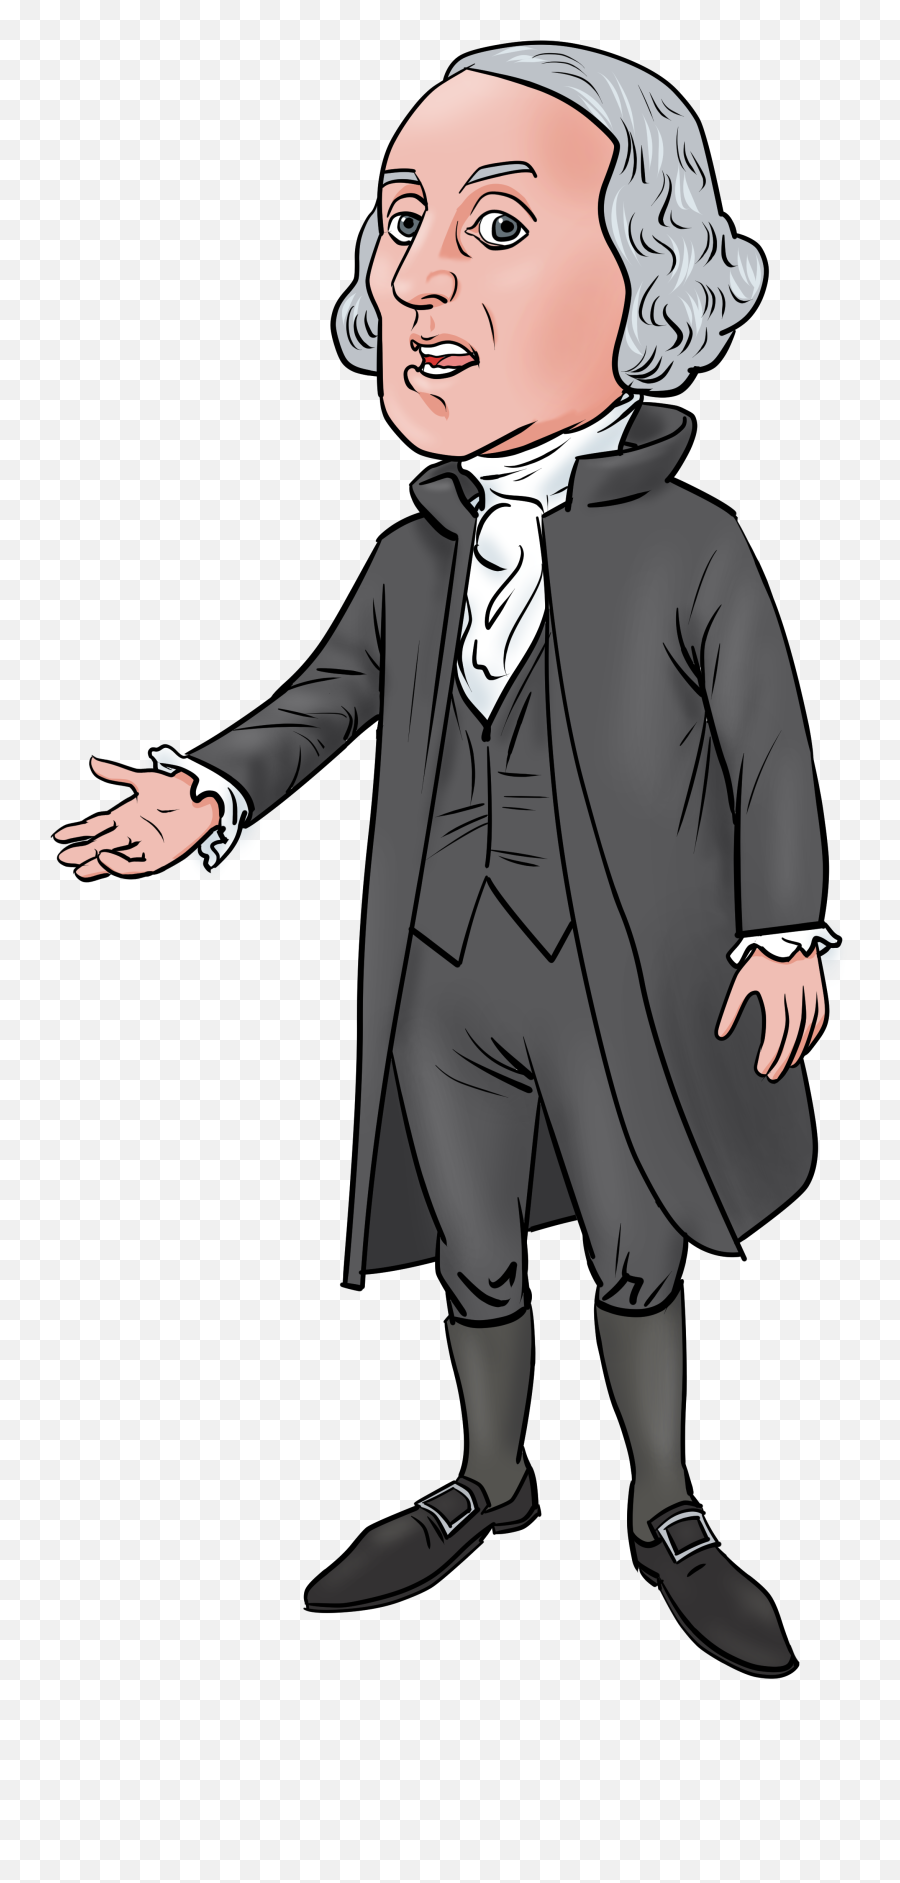 George Washington Png Download Image - Transparent George Washington Cartoon Emoji,George Washington Clipart